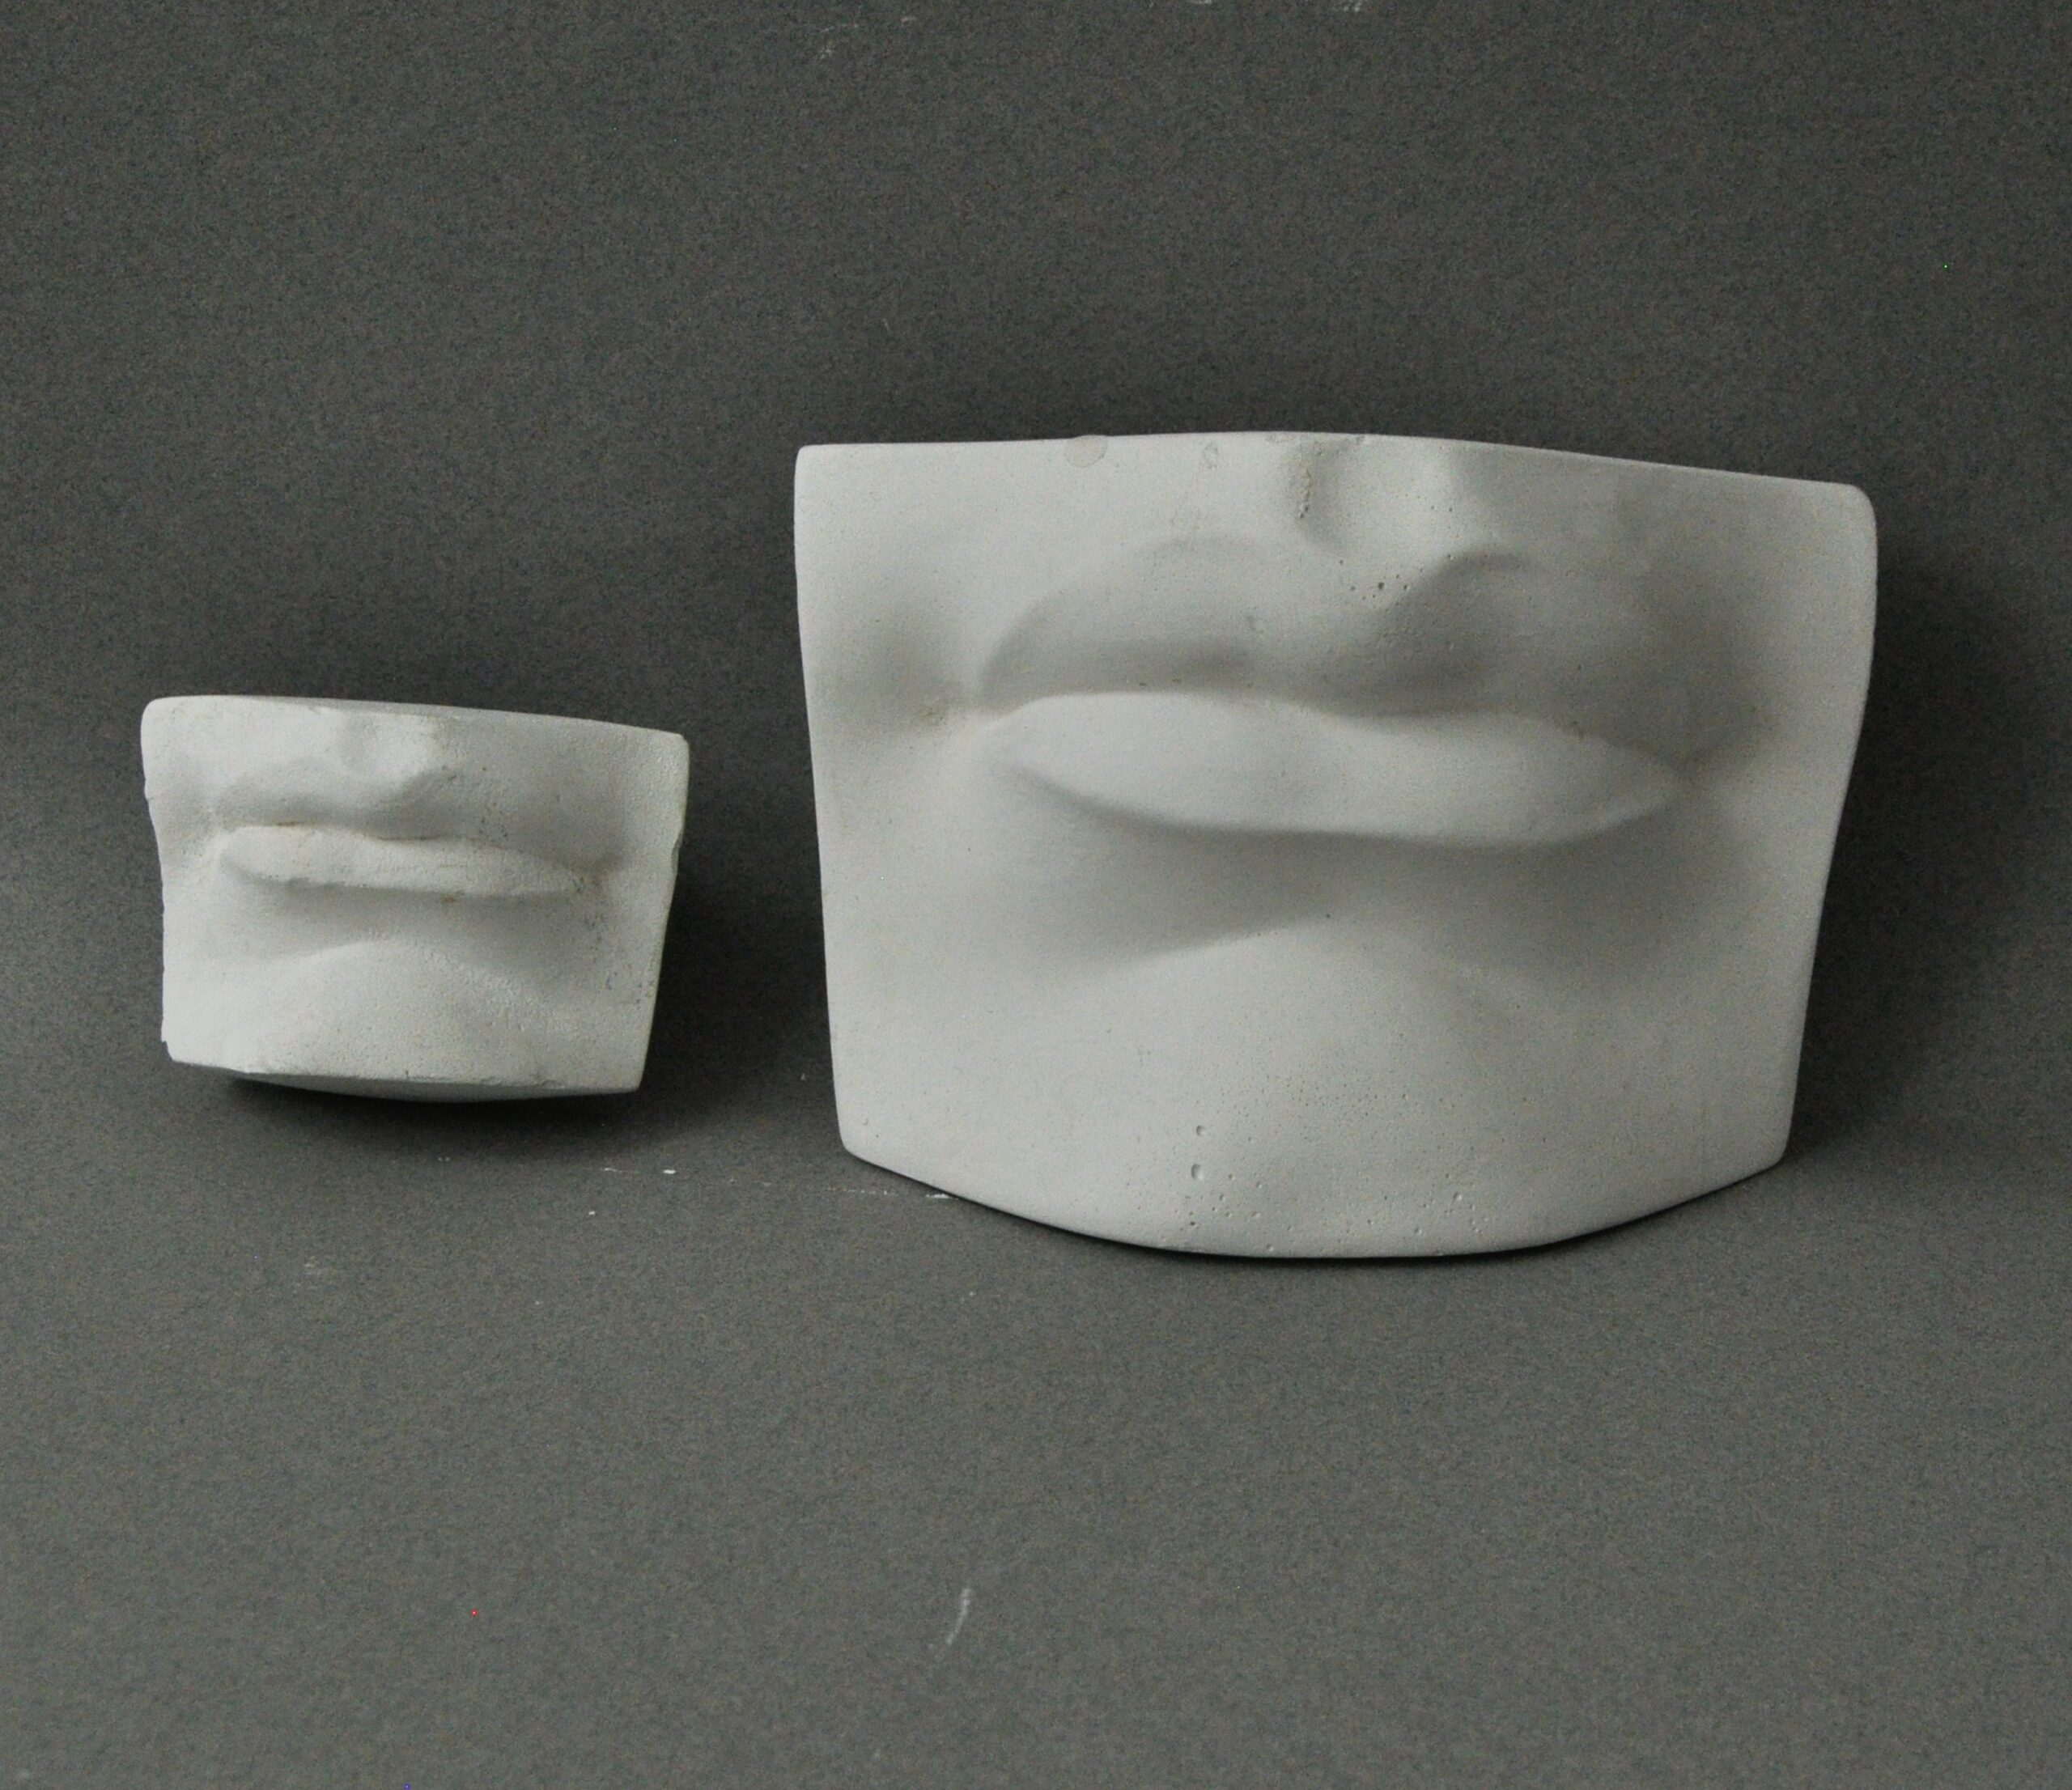 Comparison of the small and big plaster cast of Michelangelos David mouth from the front, used in traditional drawing courses